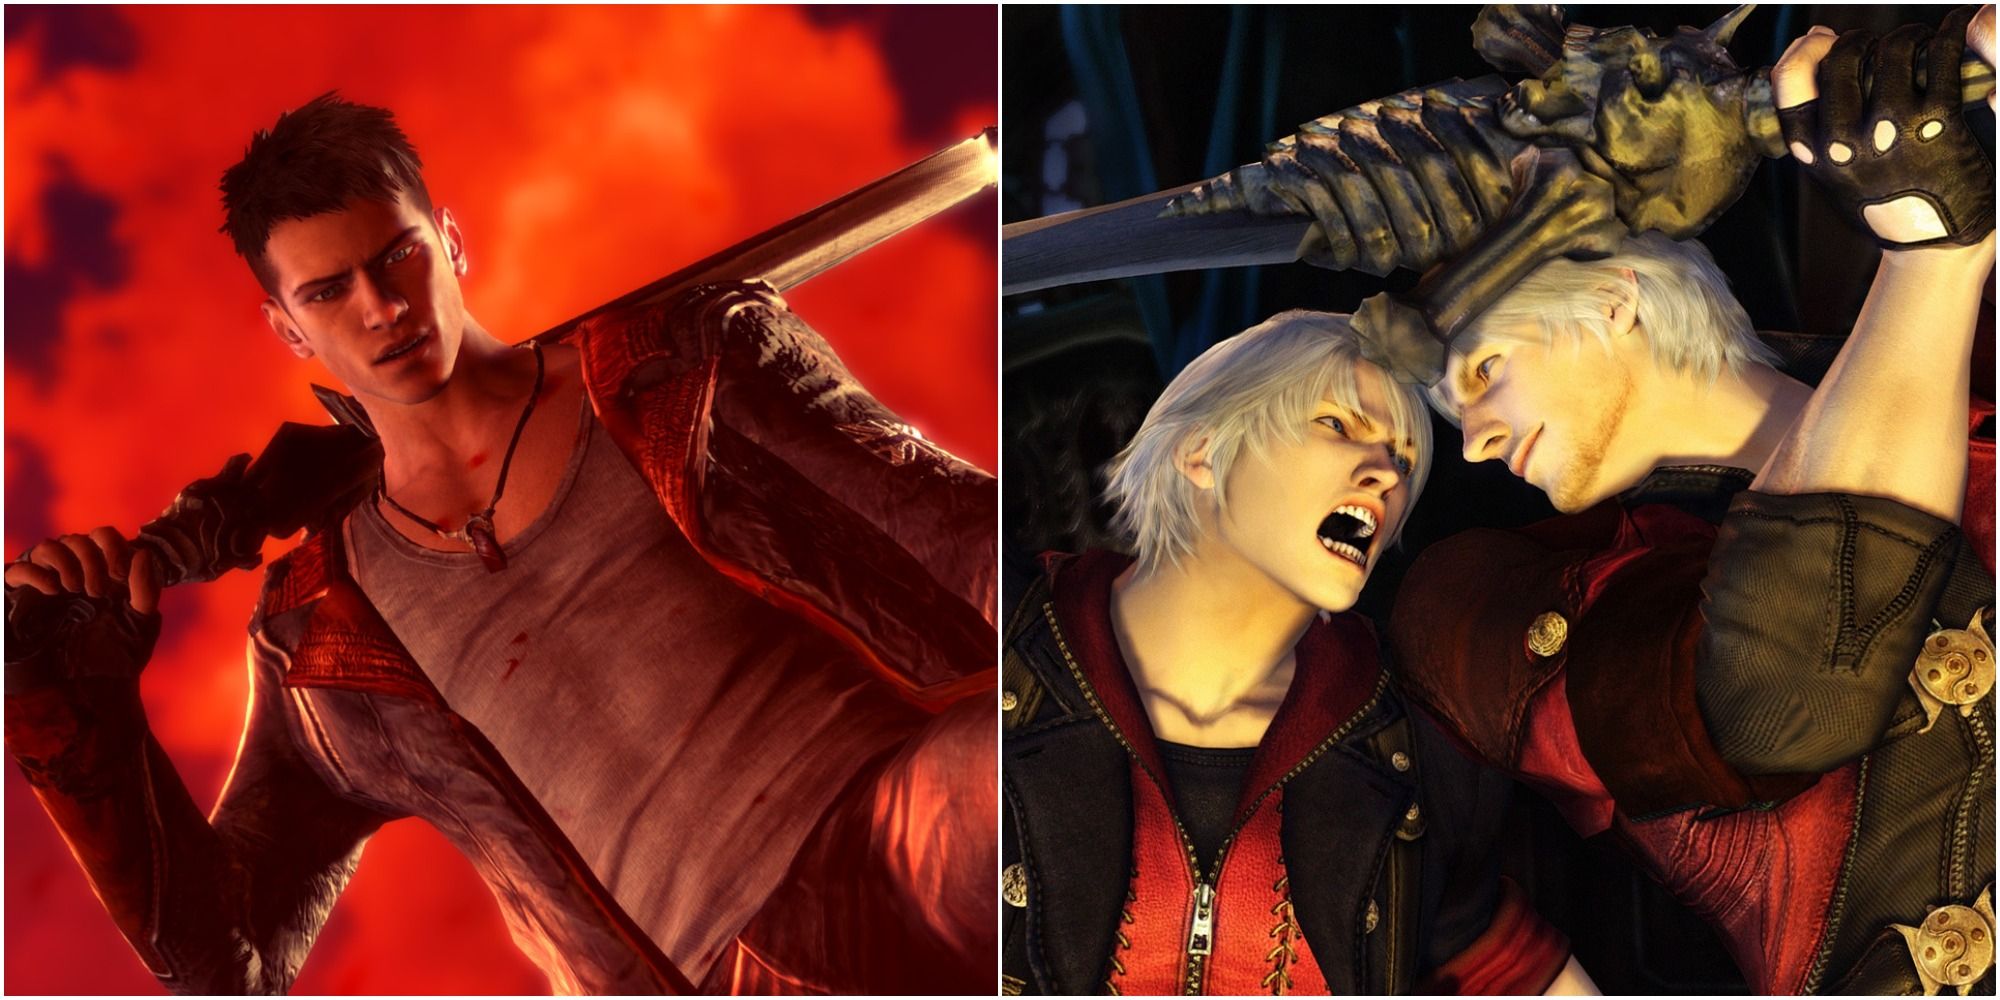  Devil May Cry 2 : Artist Not Provided: Video Games